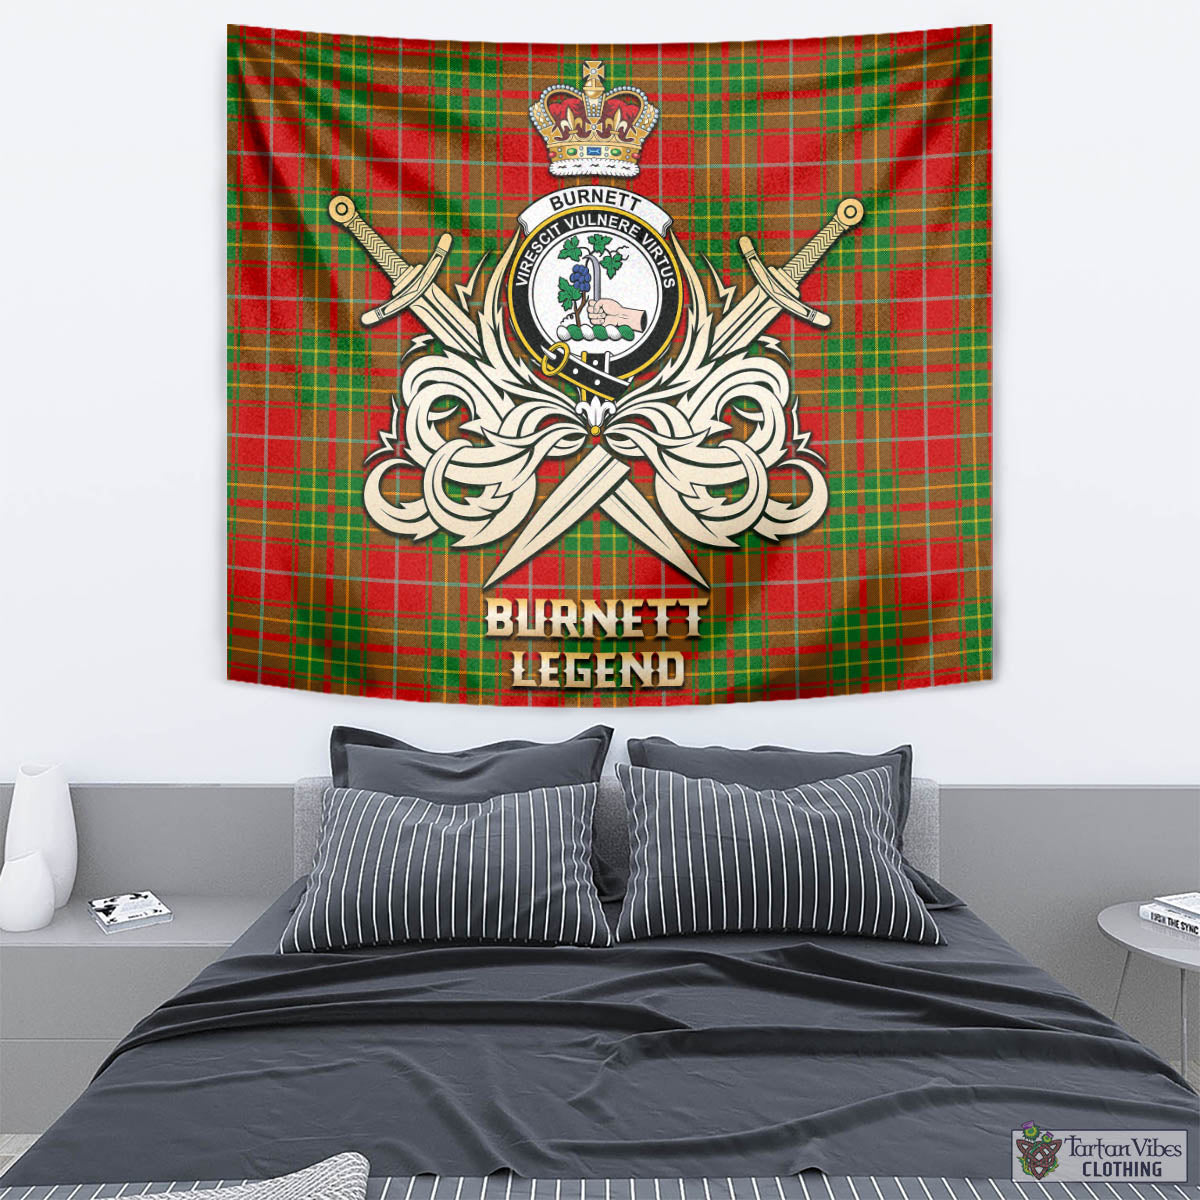 Tartan Vibes Clothing Burnett Ancient Tartan Tapestry with Clan Crest and the Golden Sword of Courageous Legacy